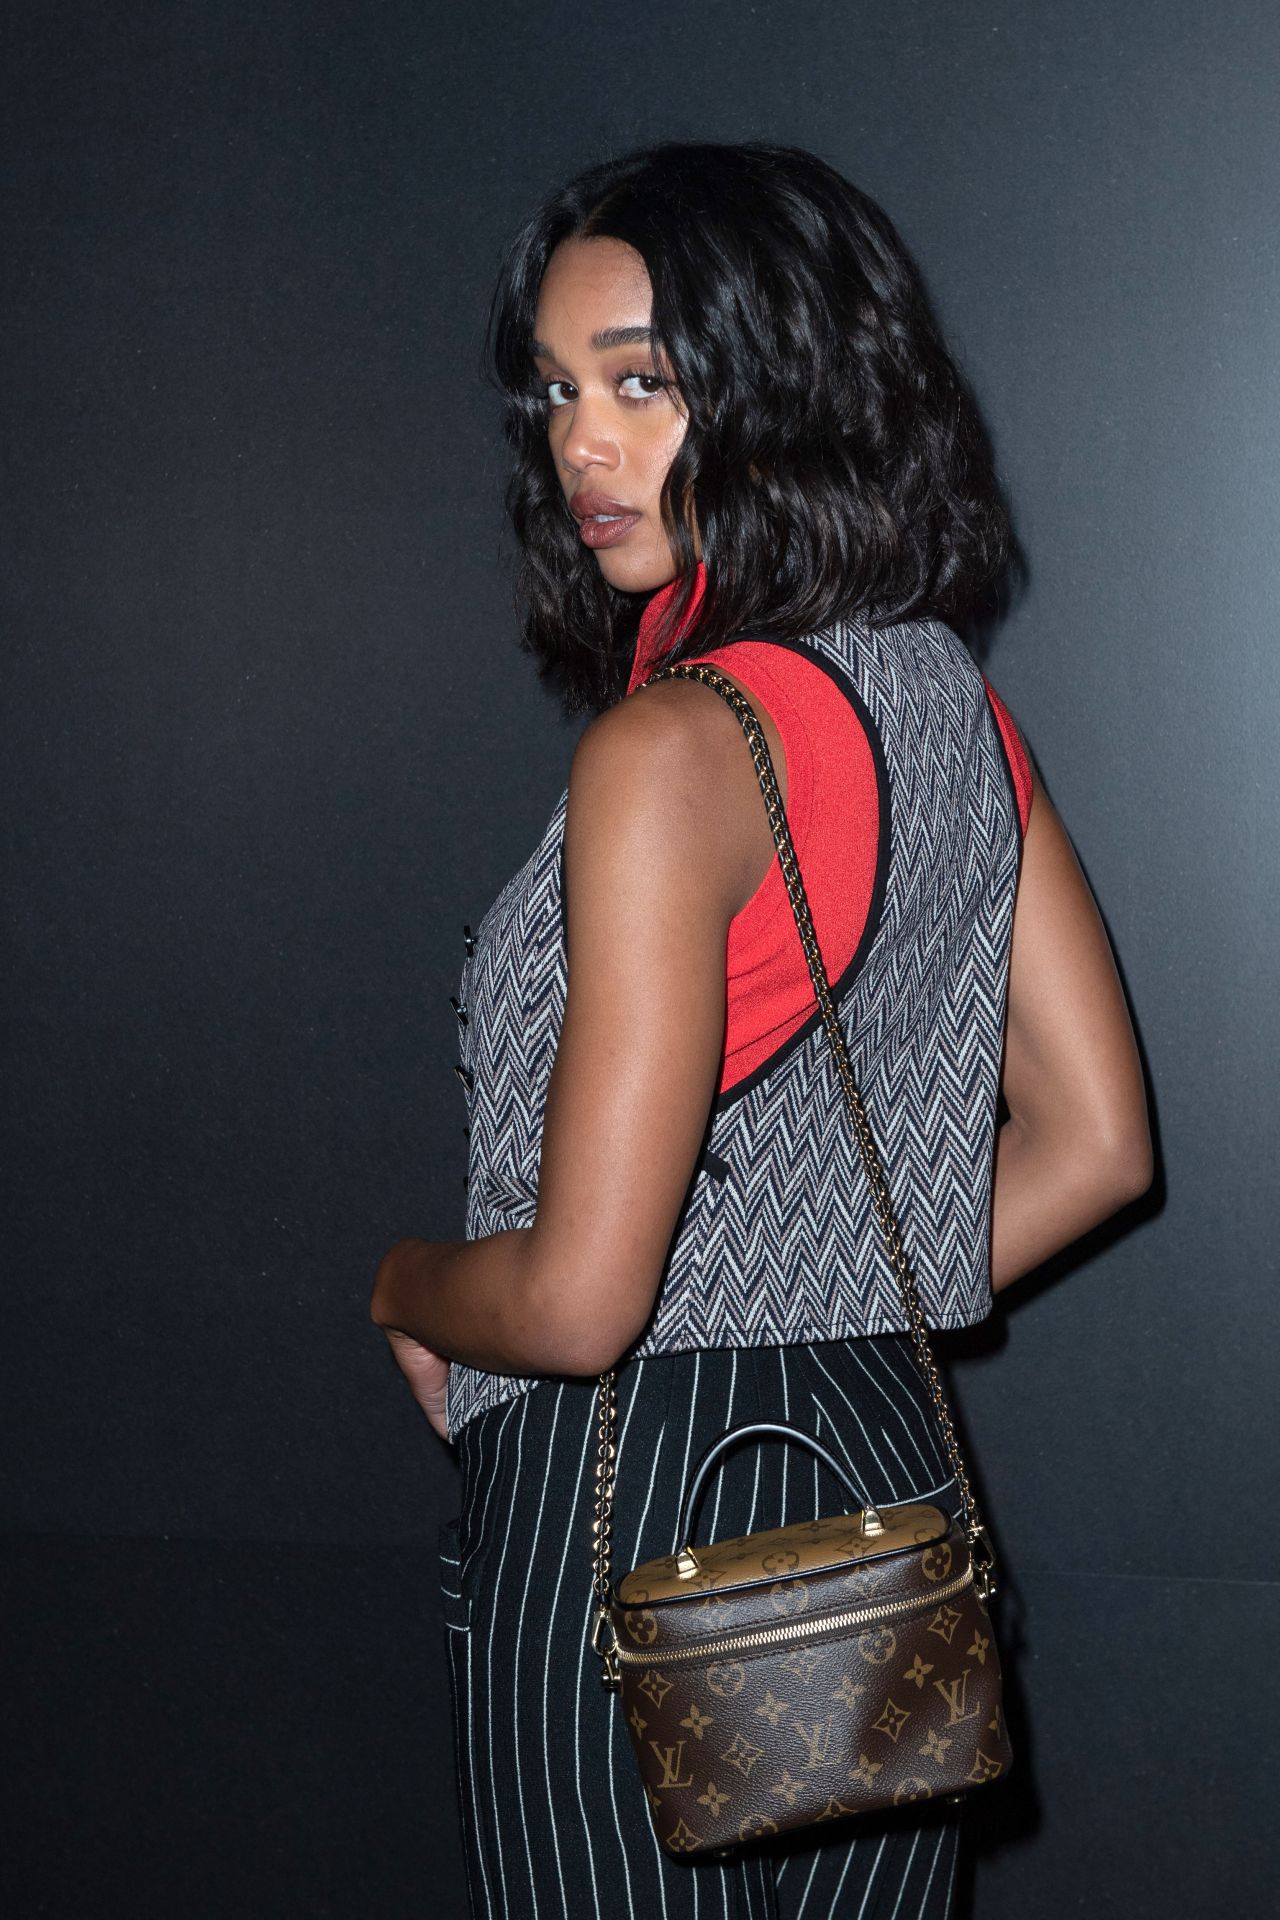 Laura Harrier Louis Vuitton Fashion Show October 3, 2017 – Star Style